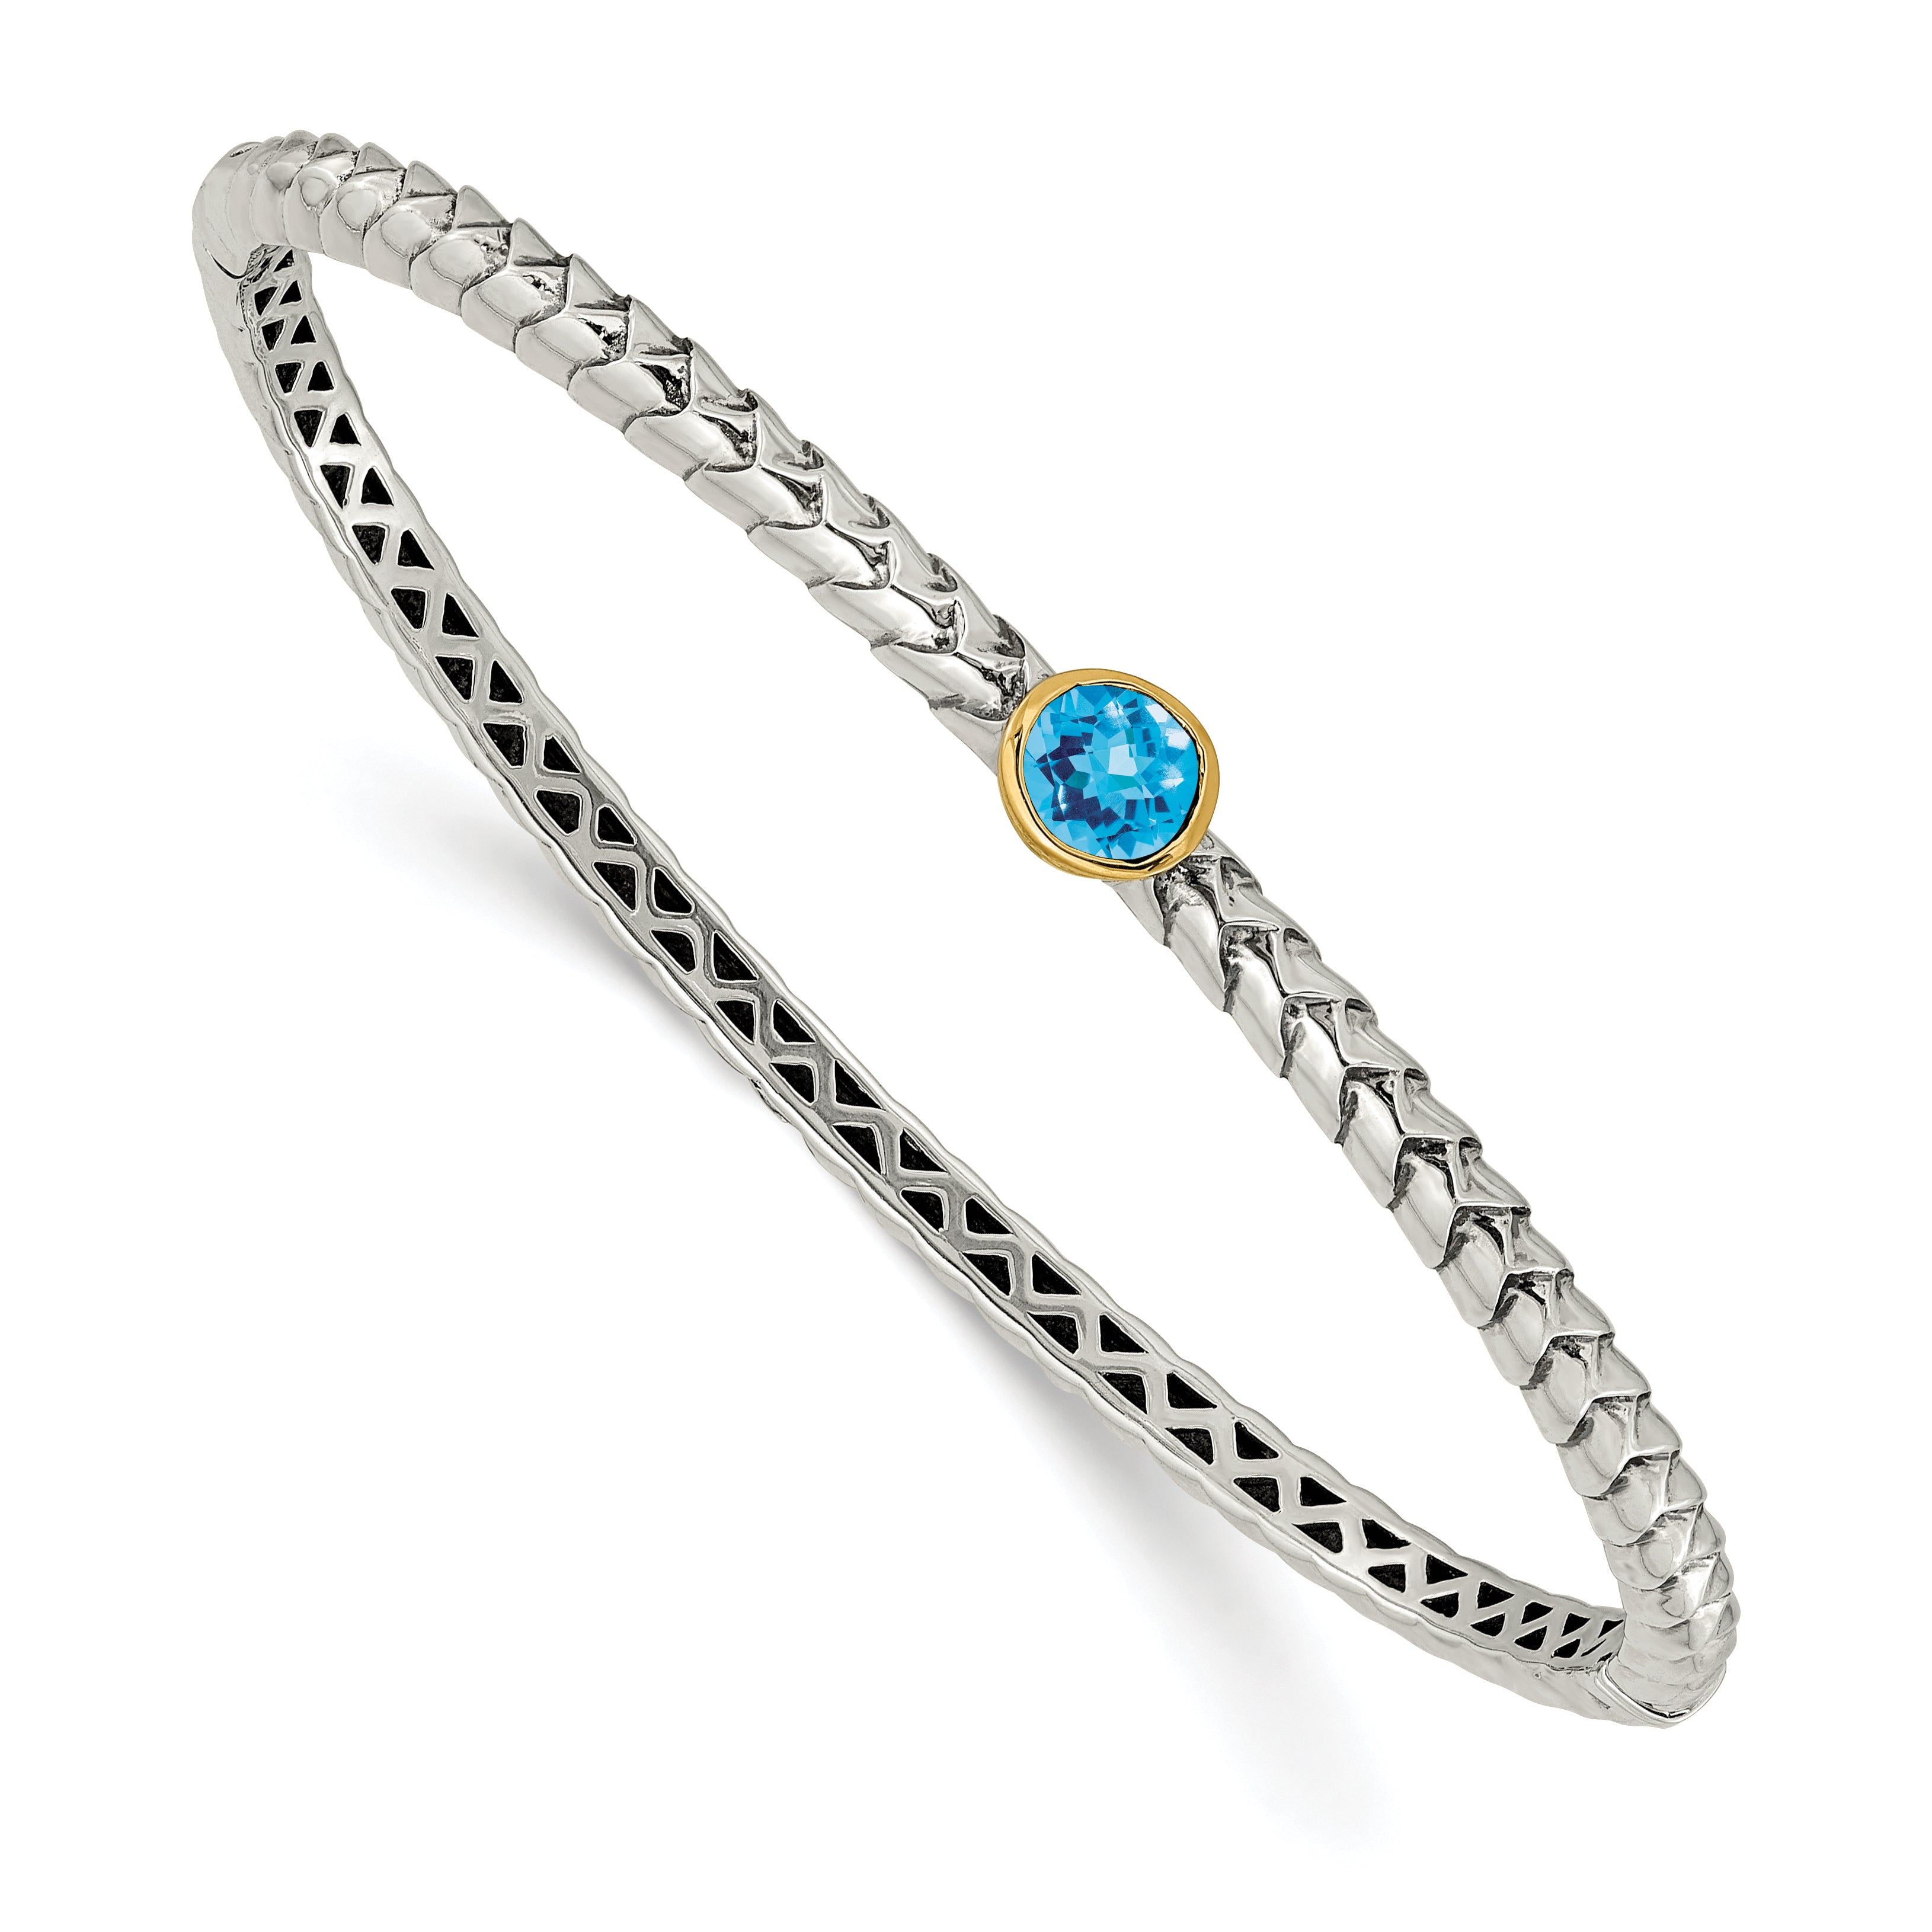 Shey Couture Sterling Silver Antiqued with 14K Accent Round Bezel Blue Topaz Bangle Bracelet